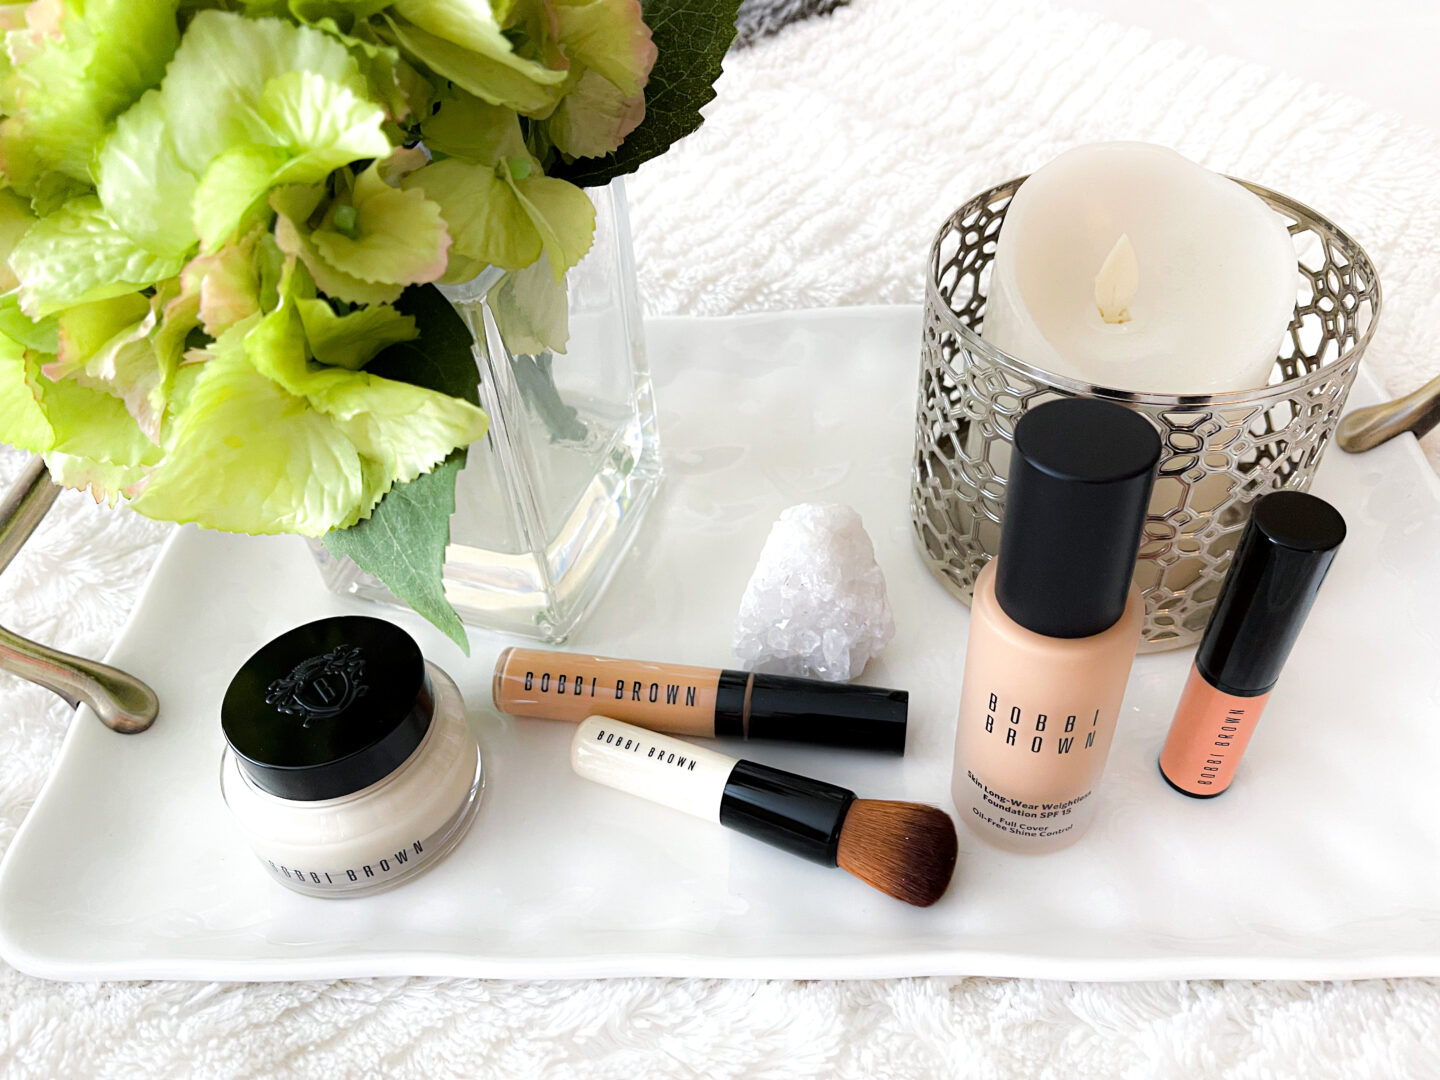 Bobbi Brown Cosmetics Complexion Routine products on bed tray.